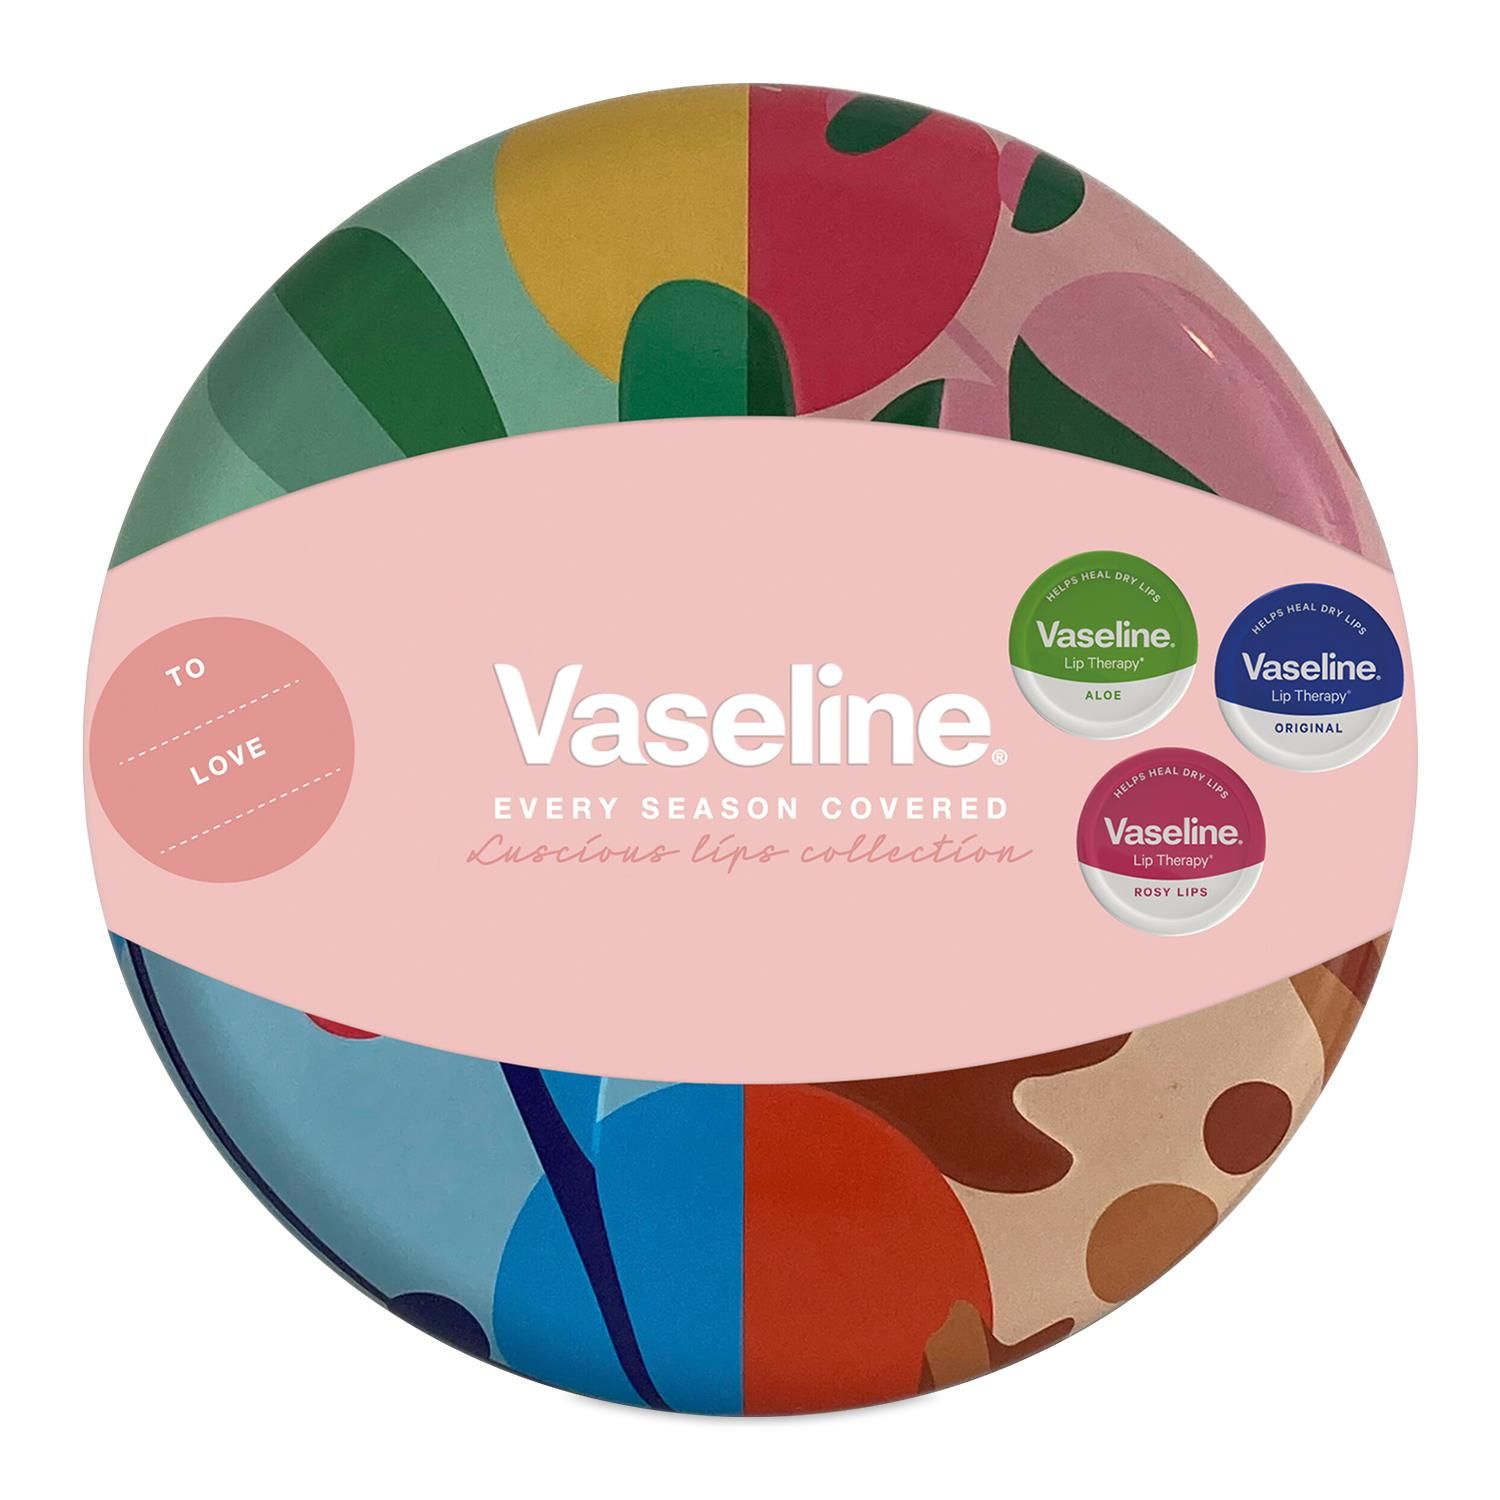 Vaseline Lip Balm 3pcs Gift Set Luscious Lips Collection Aloe Original & Rosy 

Vaseline Luscious lips collection is put together with three Lip Therapy lip balms, made for lips that deserve the best care, all nestled inside a beautifully crafted, seasonal Vaseline tin. It includes our Original Lip Balm 20 g, an Aloe-Vera Lip Balm 20 g, The last one in the trio is Vaseline Lip Therapy Rosy Lips 20 g, Give the gift of luscious, moisturised and healthy lips all year round with Vaseline. 

Original: a firm favourite that relieves lips and locks in the moisture they need to keep feeling and looking healthy. 

Features: 
Instantly softens and soothes dry lips 
Locks in moisture to help lips recover from discomfort 
Made with triple-purified Vaseline Petroleum Jelly 
Best for chapped lips, dry skin 

Aloe Vera: Aloe-Vera Lip Therapy instantly softens and soothes dry lips, delighting her senses with a fresh aloe scent. 

Features: 
Made with triple-purified Vaseline petroleum jelly 
Contains aloe, known to calm and soothe dry irritated skin 
Moisture to help lips recover from discomfort 
Instantly softens and soothes dry lips 
Locks in moisture to help lips recover from discomfort 

Rosy Lips: Vaseline rosy lips made with sweet almond and rose oils for glossy lips with natural shine and a refreshing floral scent. 

Features: 
Helps soothe and heal dry lips by locking in moisture 
Made with Vaseline Jelly and designed to protect the skin on your lips 
Provides the long-lasting moisturization your lips need 
Adds a sheer pink tint to your lips and leaves behind a light rosy fragrance 
Non-sticky and non-greasy formula, suitable for regular use 


Gift Set Includes: 
1x Vaseline Lip Therapy Original, 20g 
1x Vaseline Lip Therapy Aloe-Vera, 20g 
1x Vaseline Lip Therapy Rosy Lips, 20g